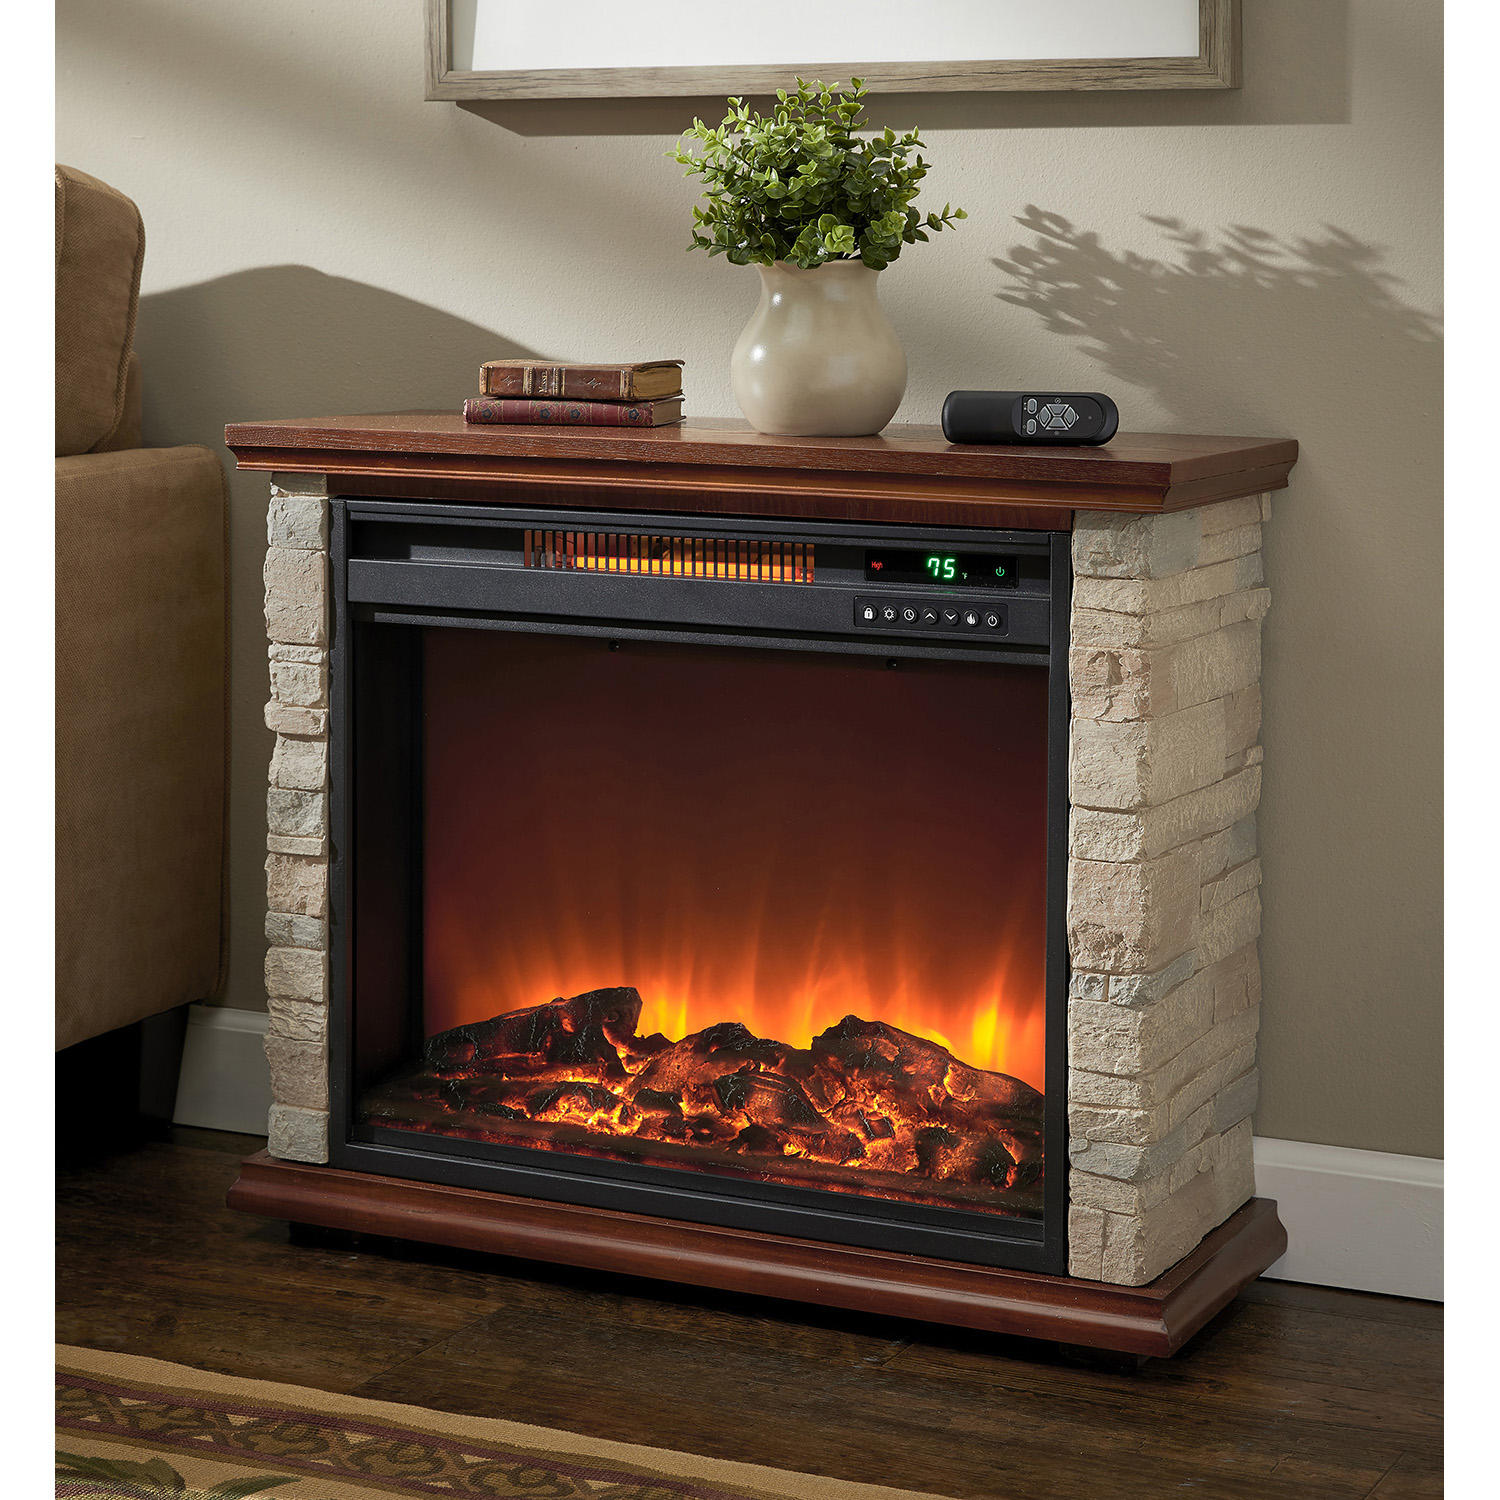 Lifesmart Stone Accent Portable Freestanding Fireplace Heater with Remote Control